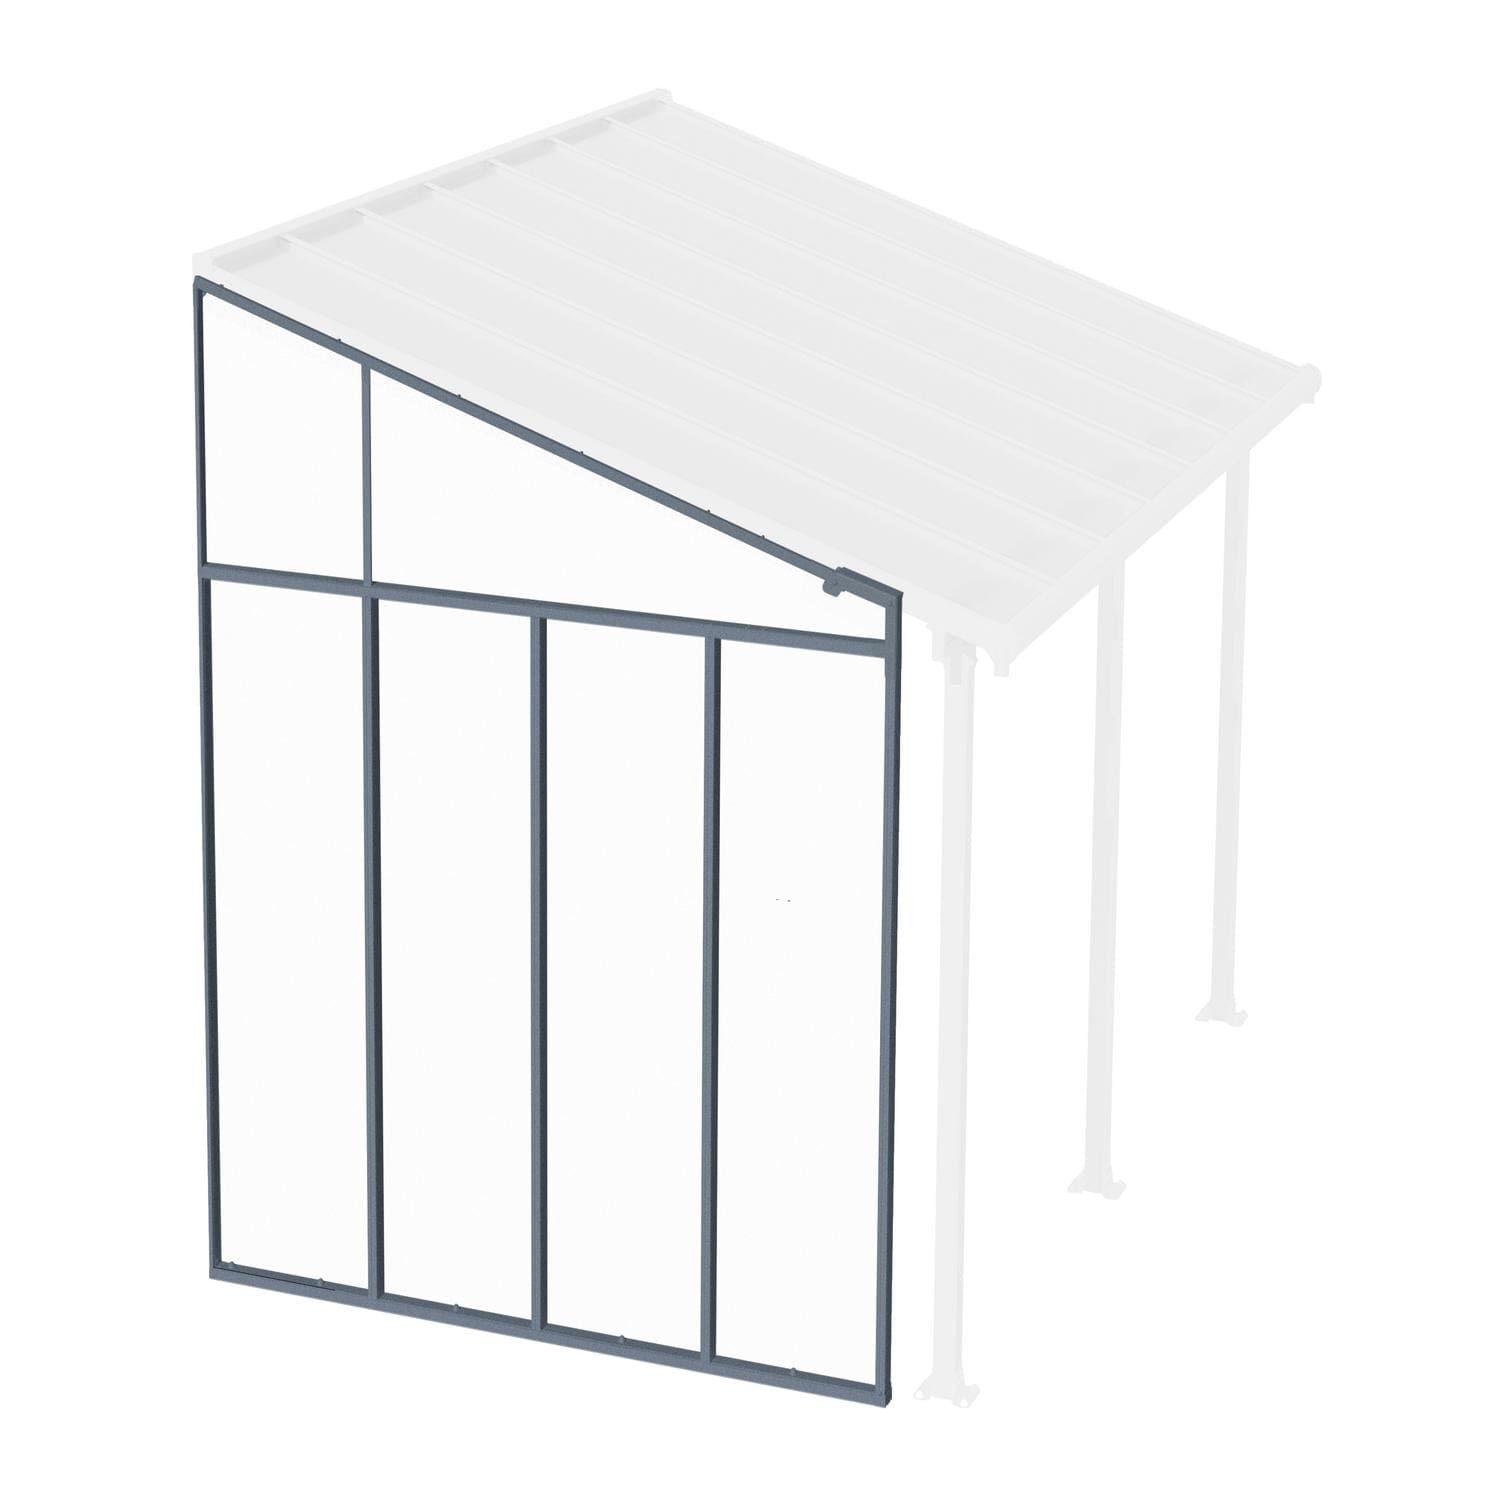 Palram - Canopia Patio Covers Palram - Canopia | Feria 13 ft Patio Cover Sidewall Kit - White HG9205